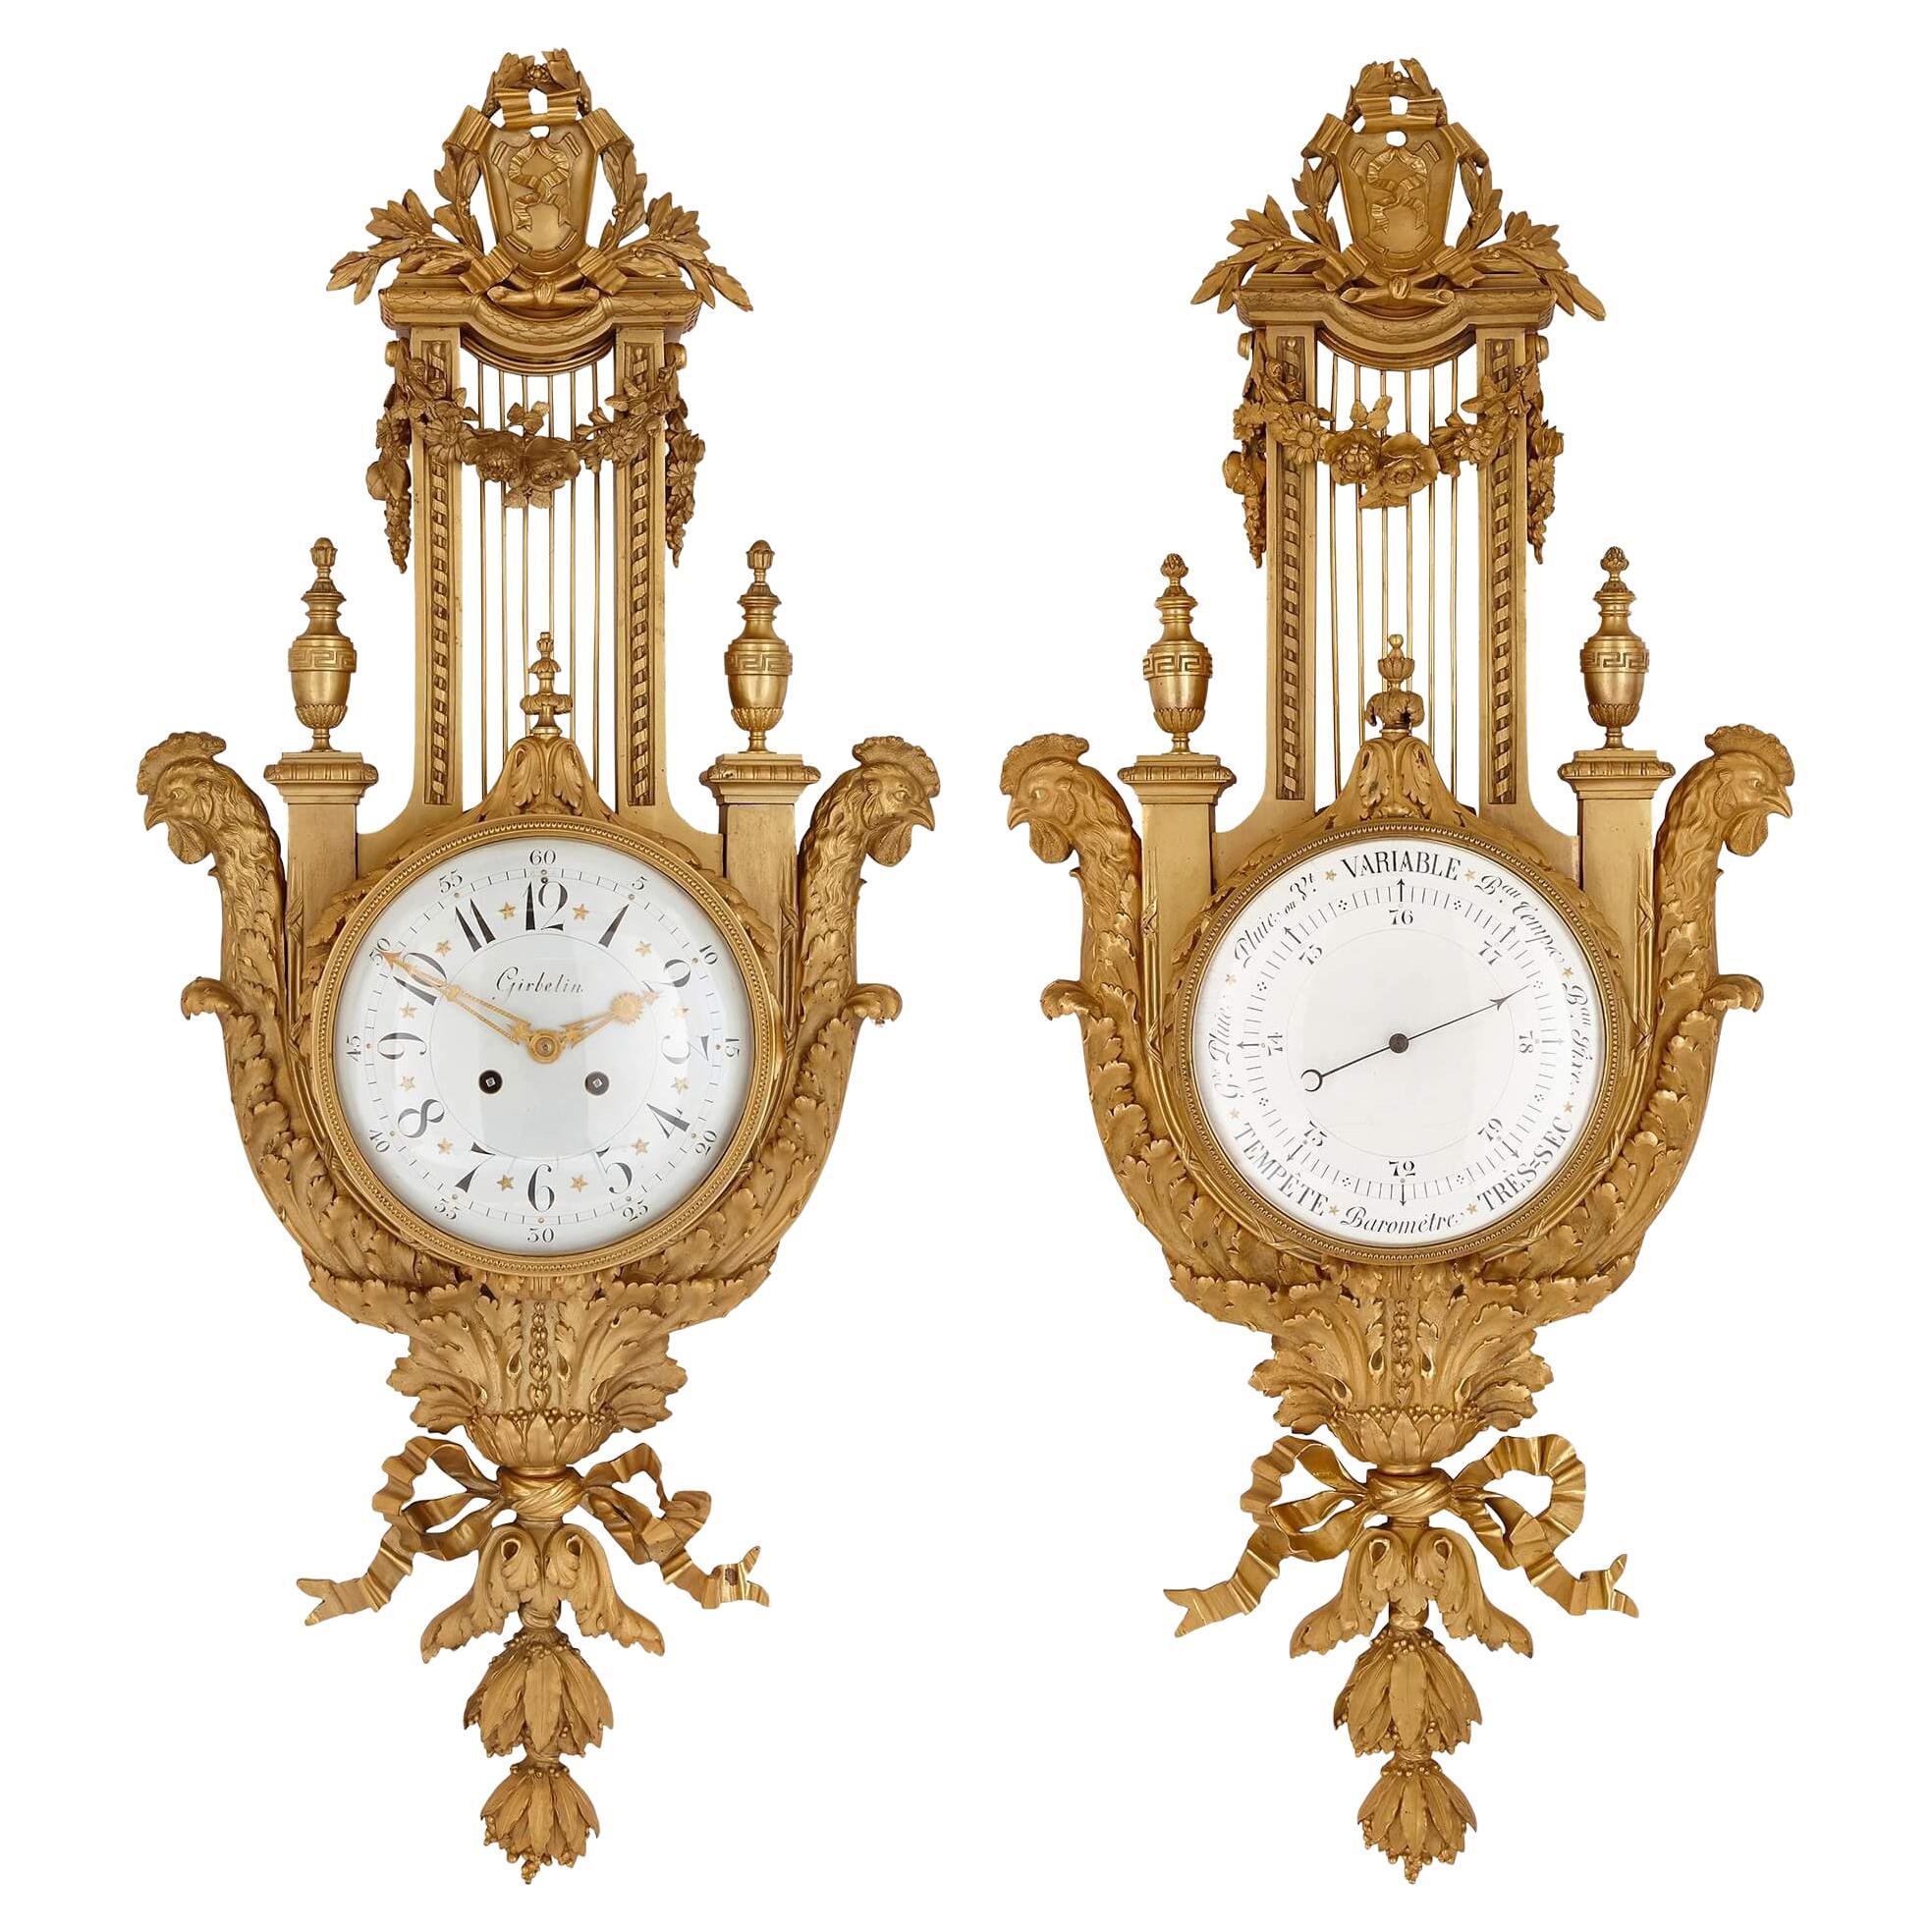 19th Century Neoclassical Style Gilt Bronze Cartel Clock and Barometer by Dasson